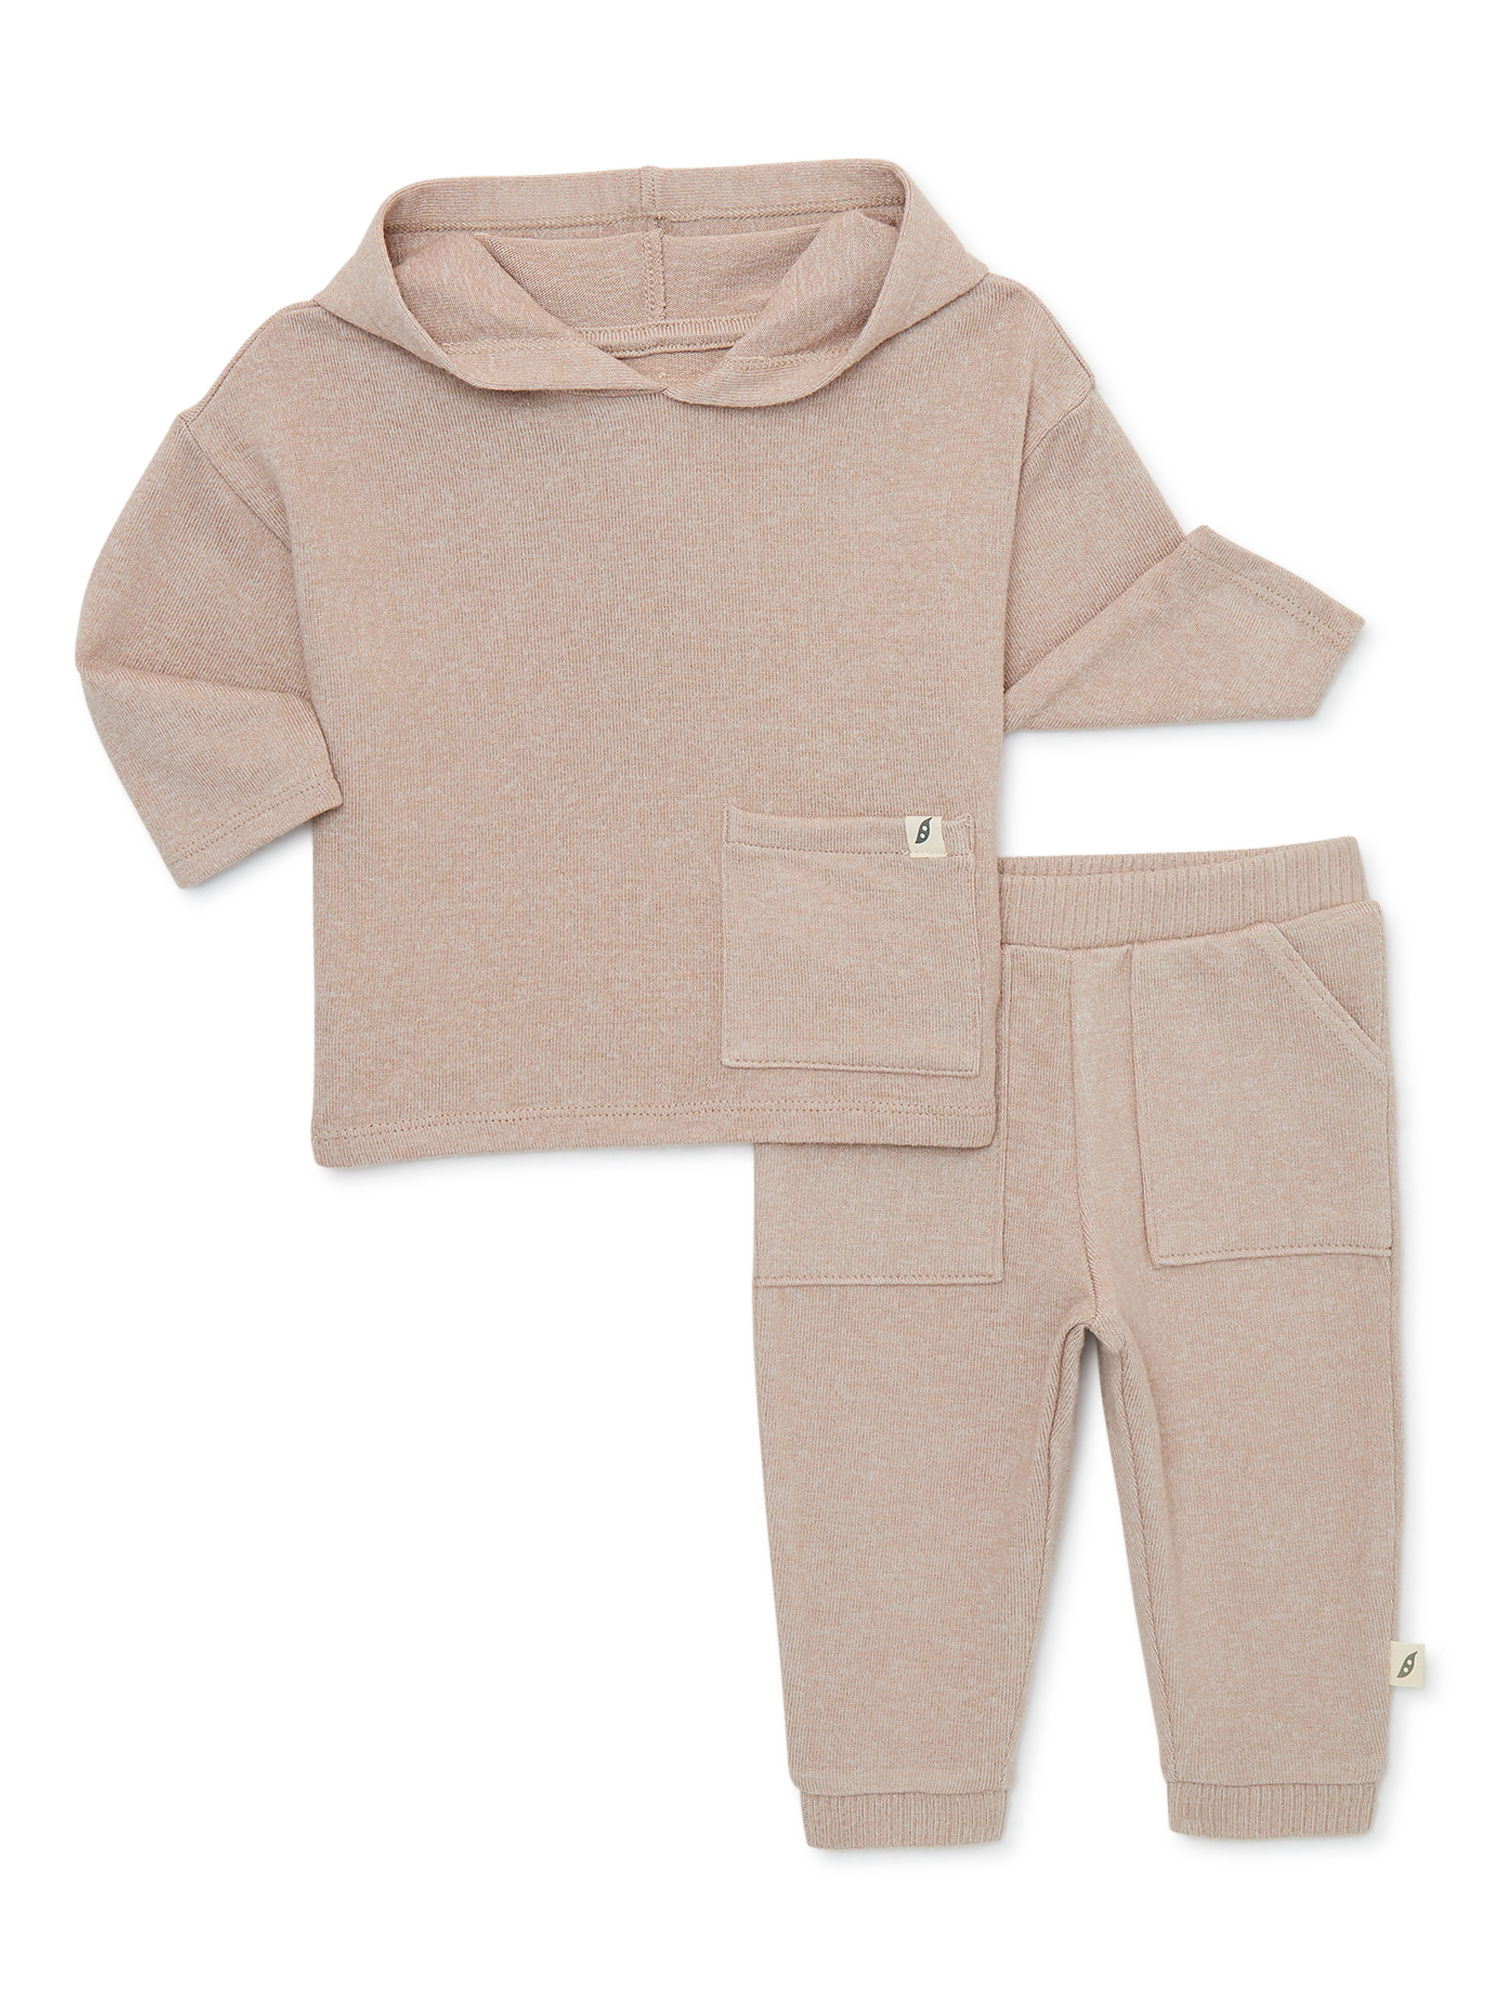 easy-peasy Baby Hoodie and Jogger Pants Outfit Set, 2-Piece, Sizes 0/3-24 Months - image 1 of 6